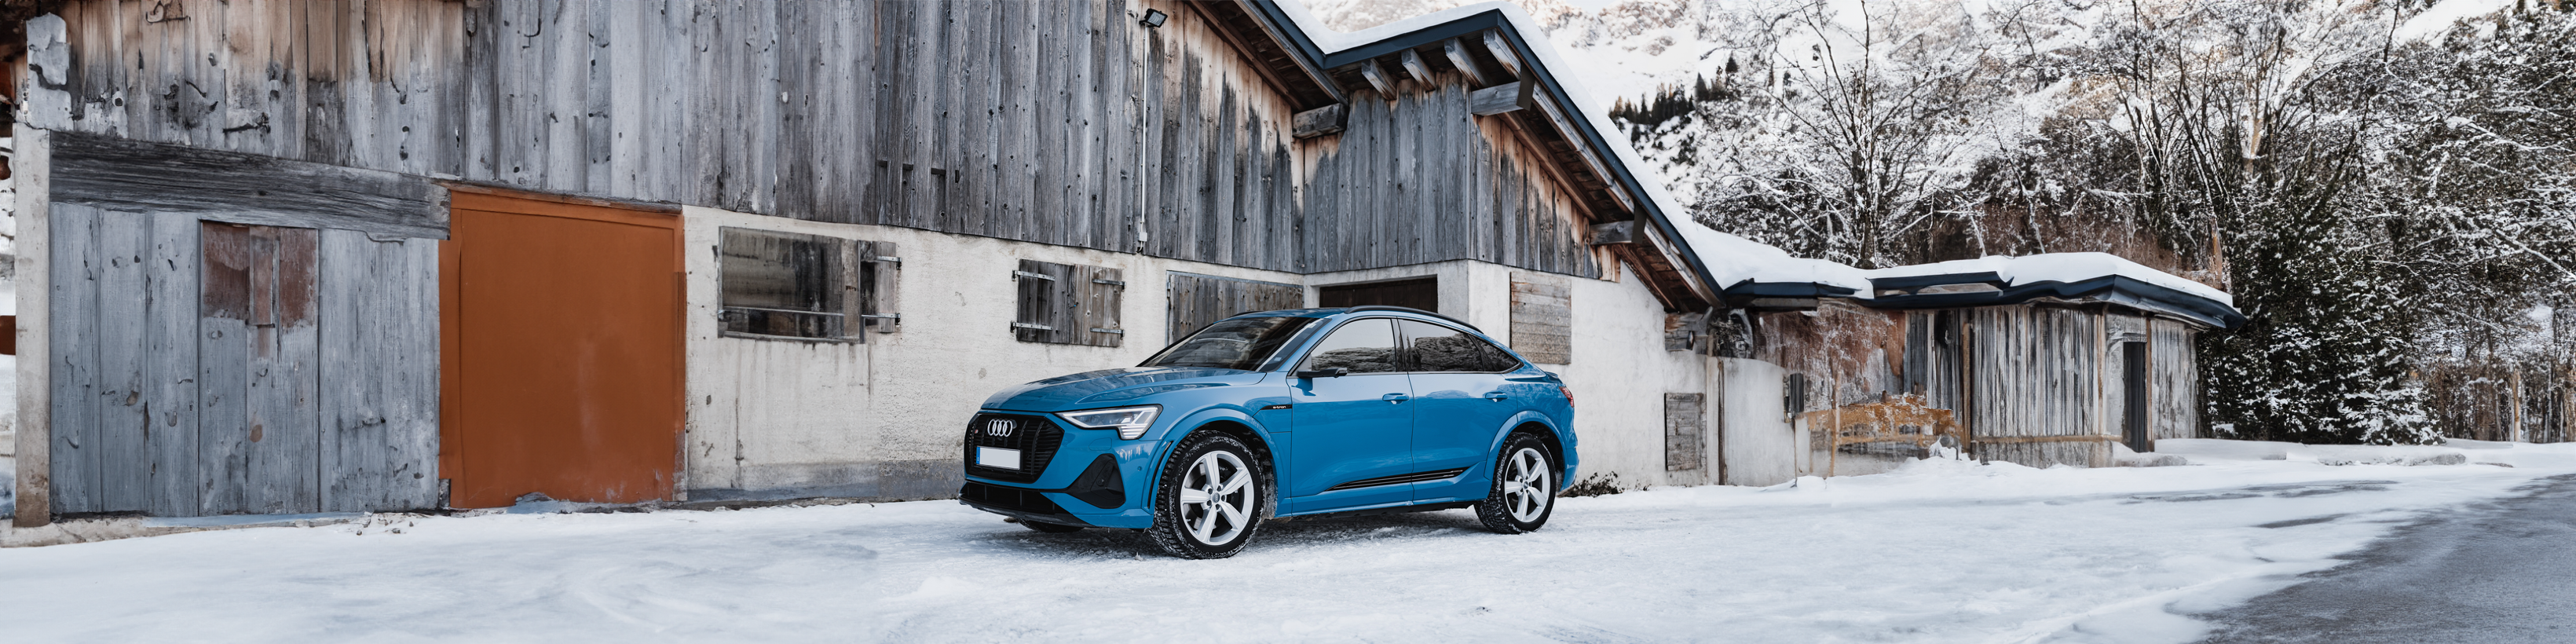 A blue Audi E-tron S Sportback parked in the snow in front of some buildings